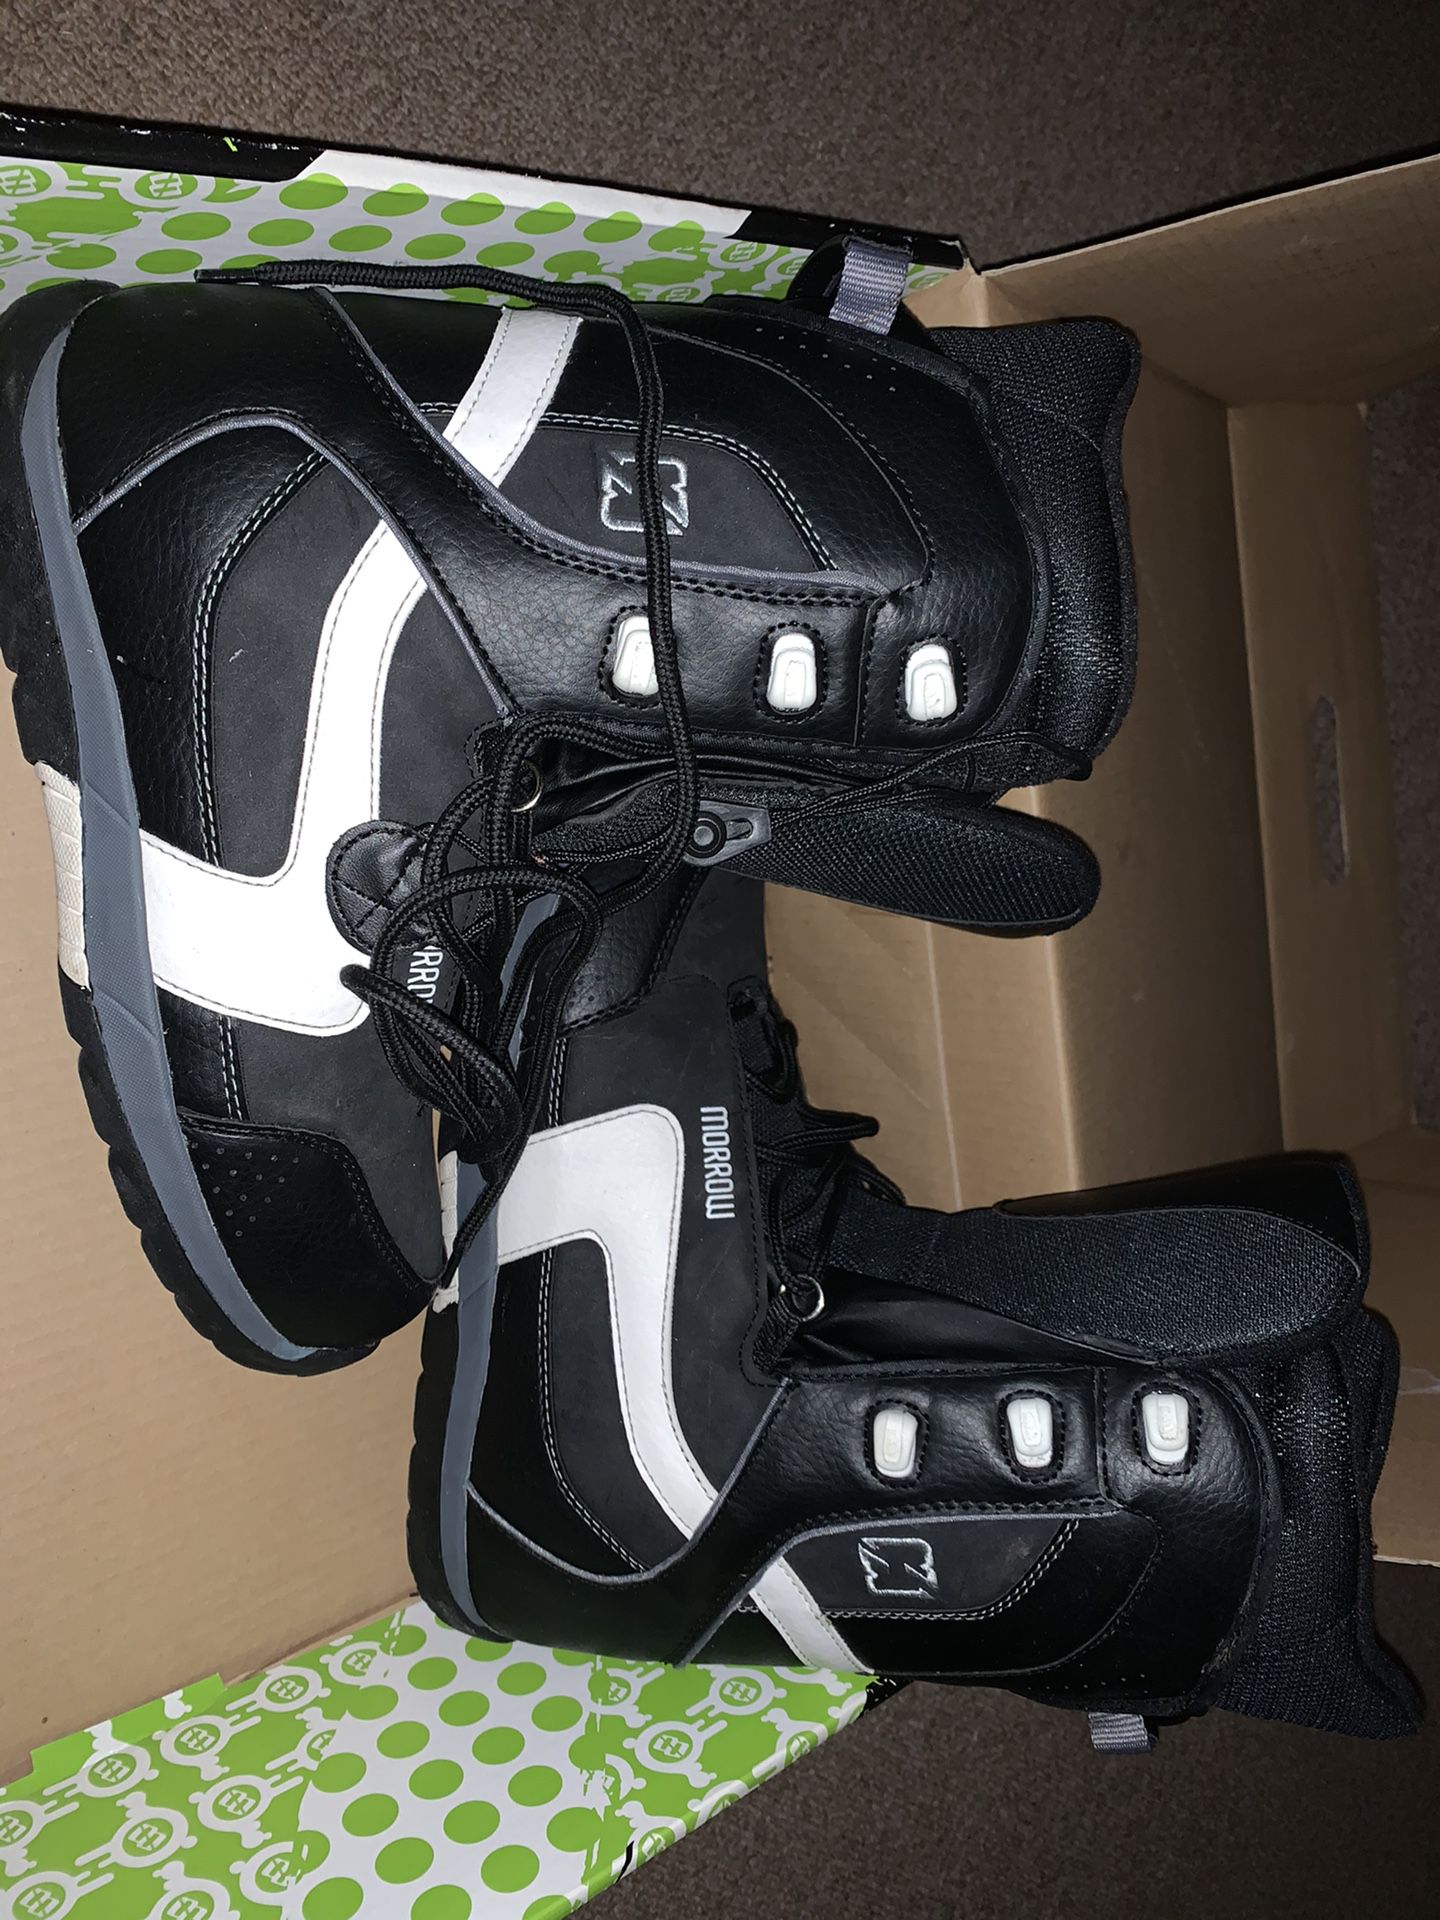 Morrow snowboard boots. Men’s Size 9